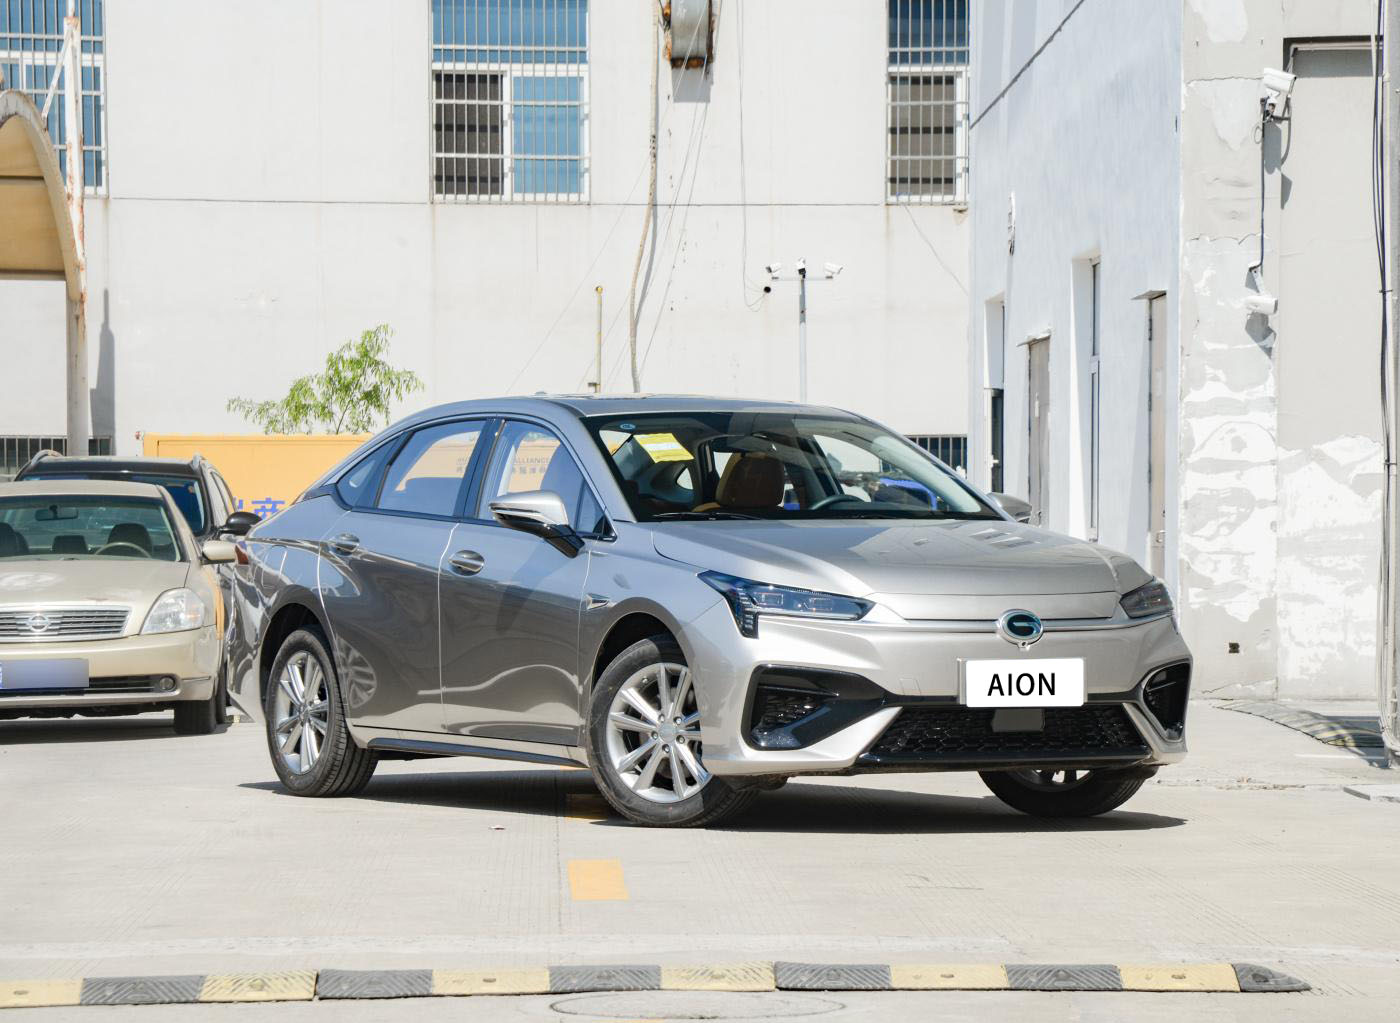 GAC AION New Energy Vehicle, AION S Mei 580 Electric Sedan To Export Trade - AION - 2